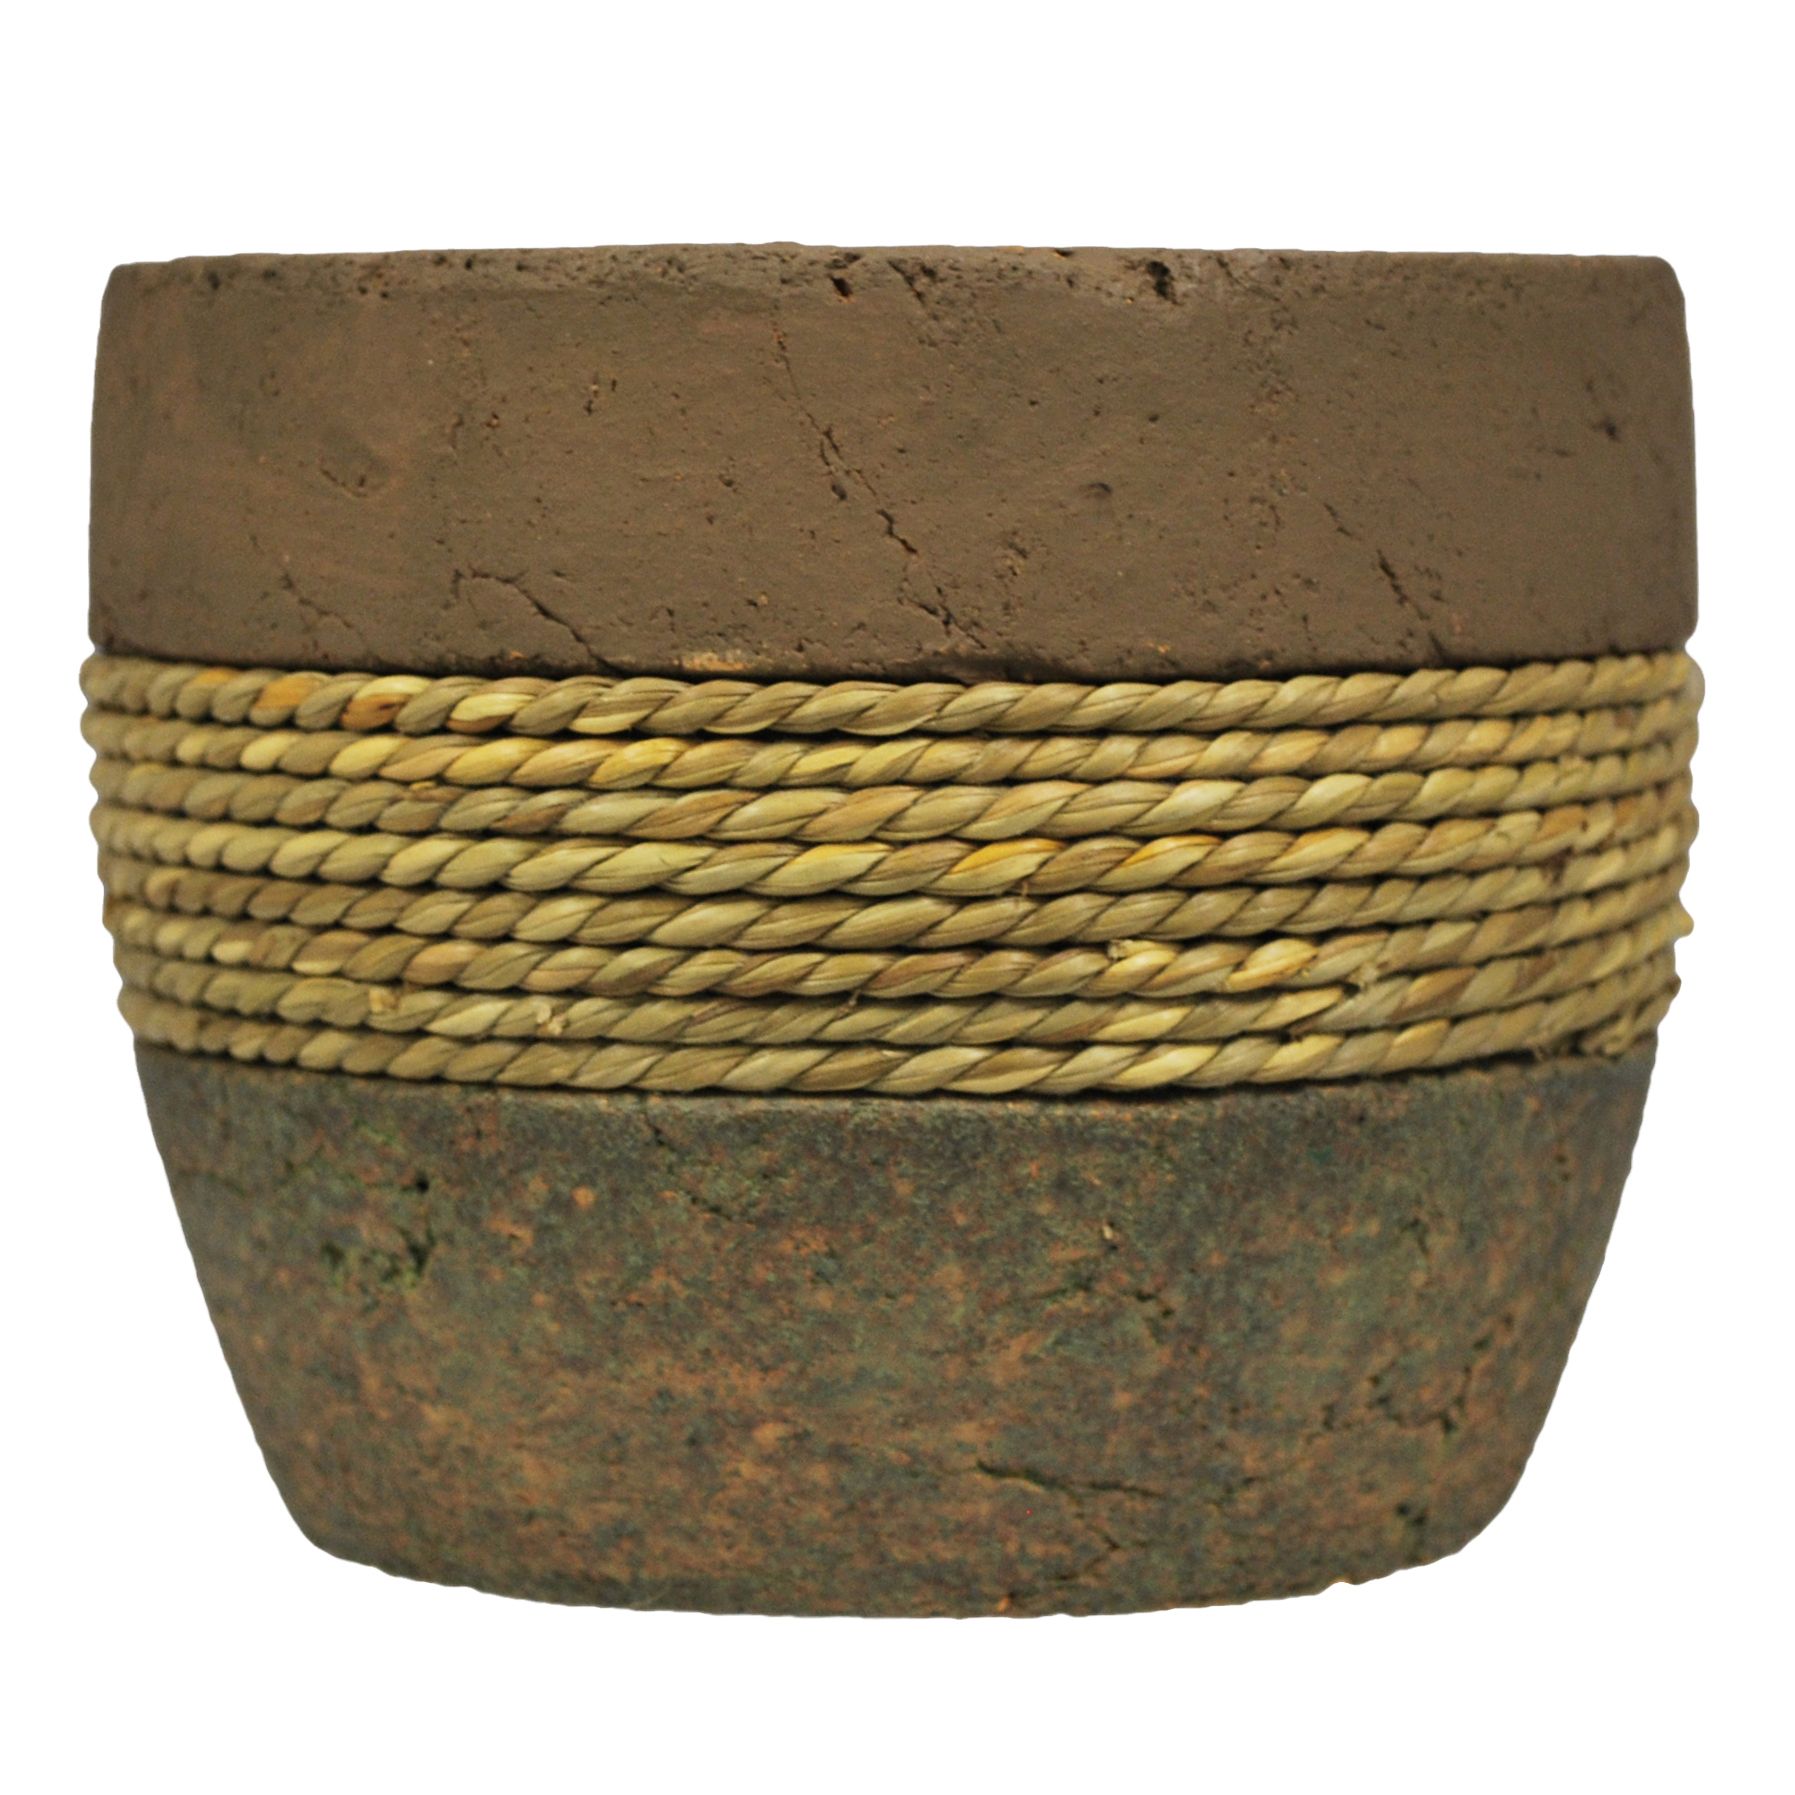 Tiki Earth Tone Ceramic Candle with Rope